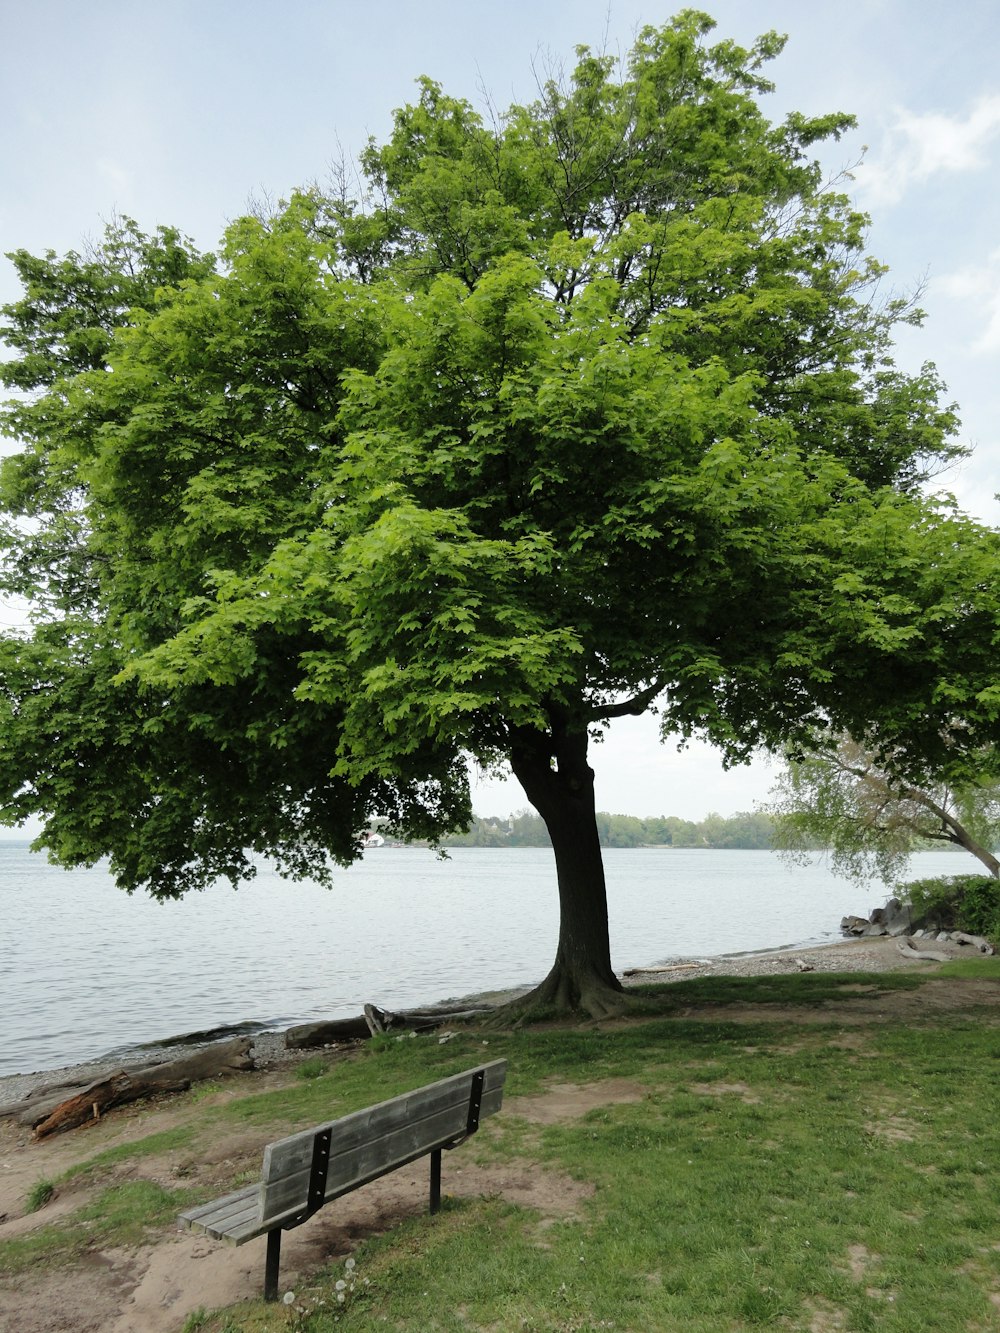 a bench under a tree near a body of water